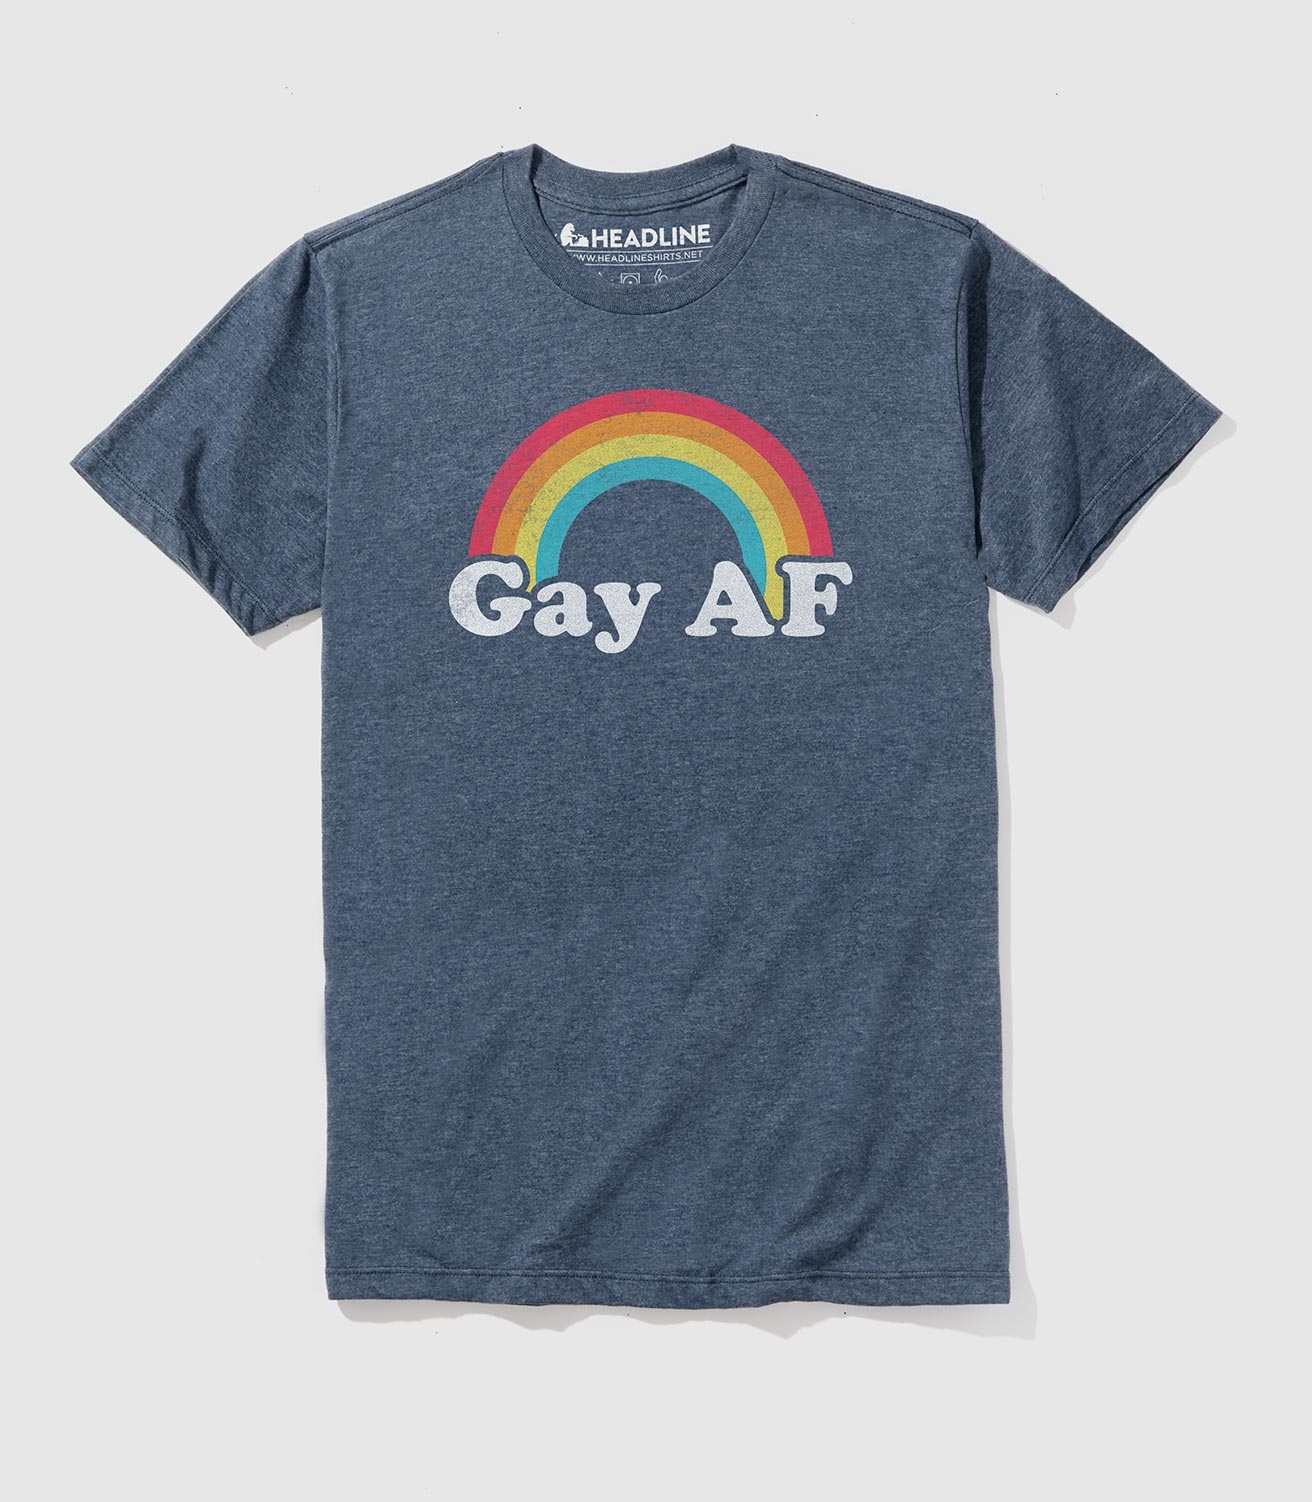 Target selling gay pride t shirts to children